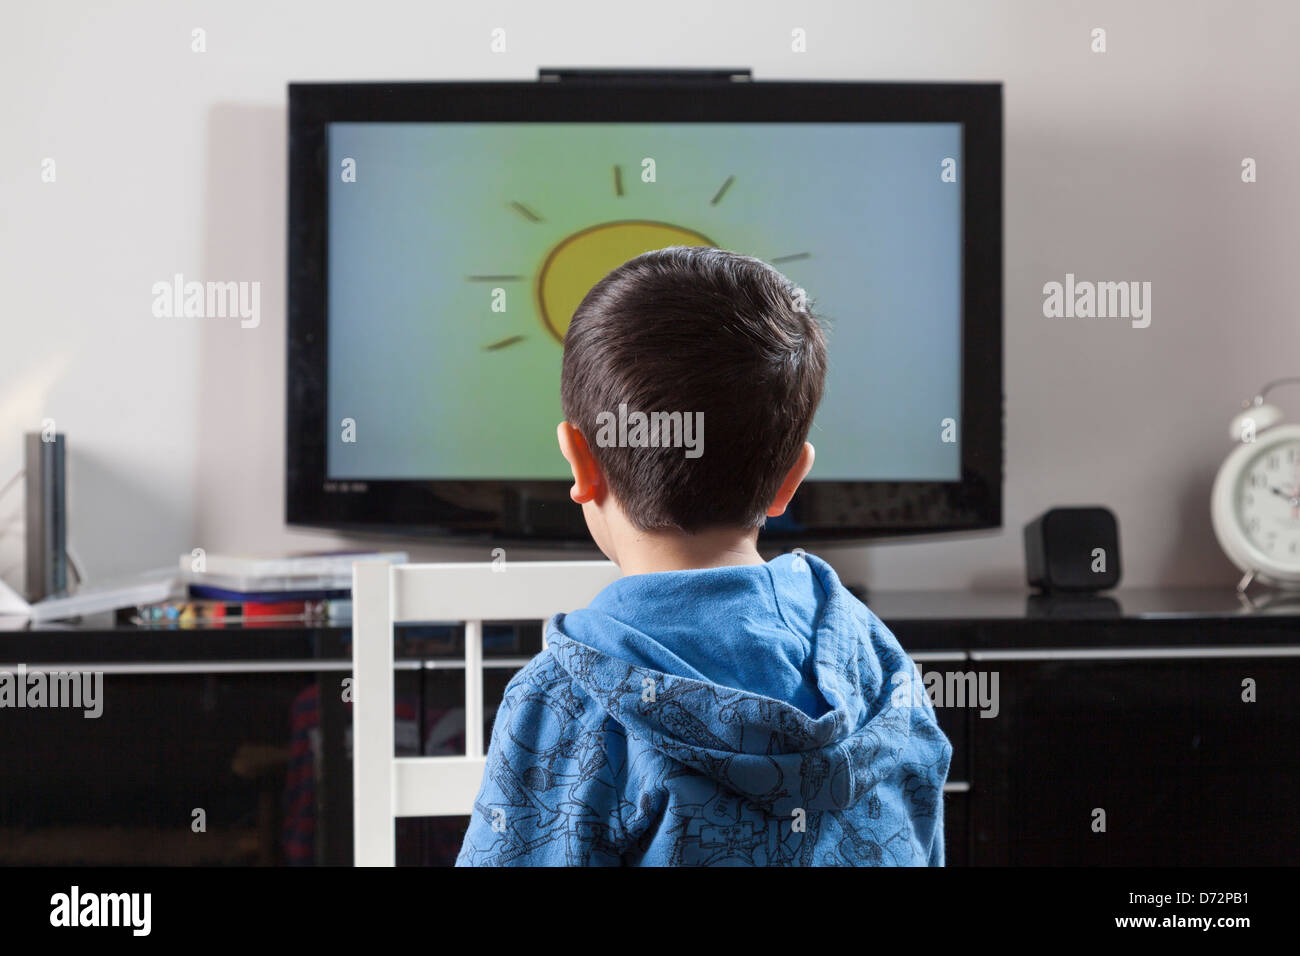 Child watches television-back view Stock Photo